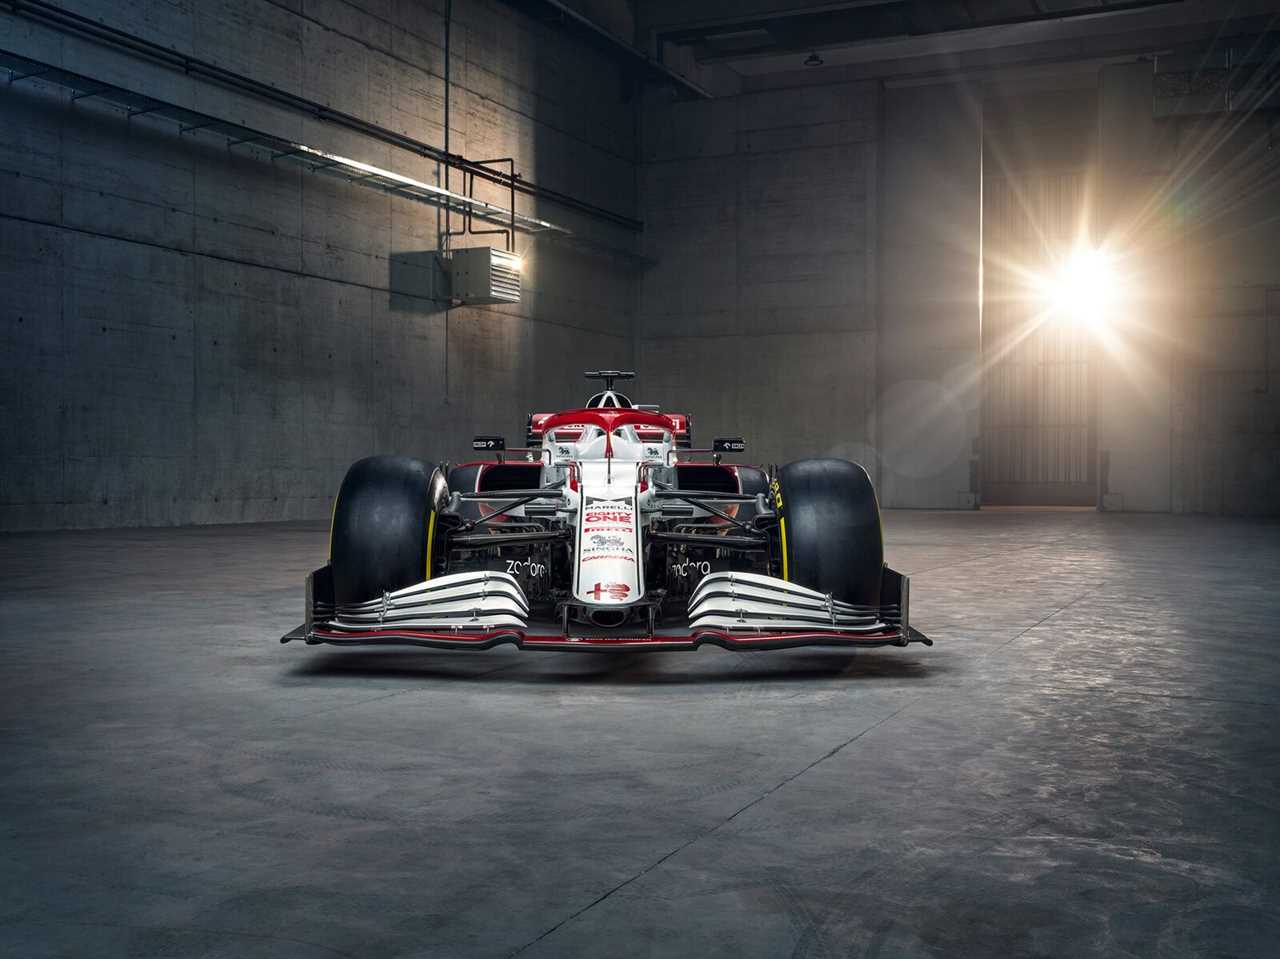 S1 systems for post-processing in use at Alfa Romeo F1 »3dpbm